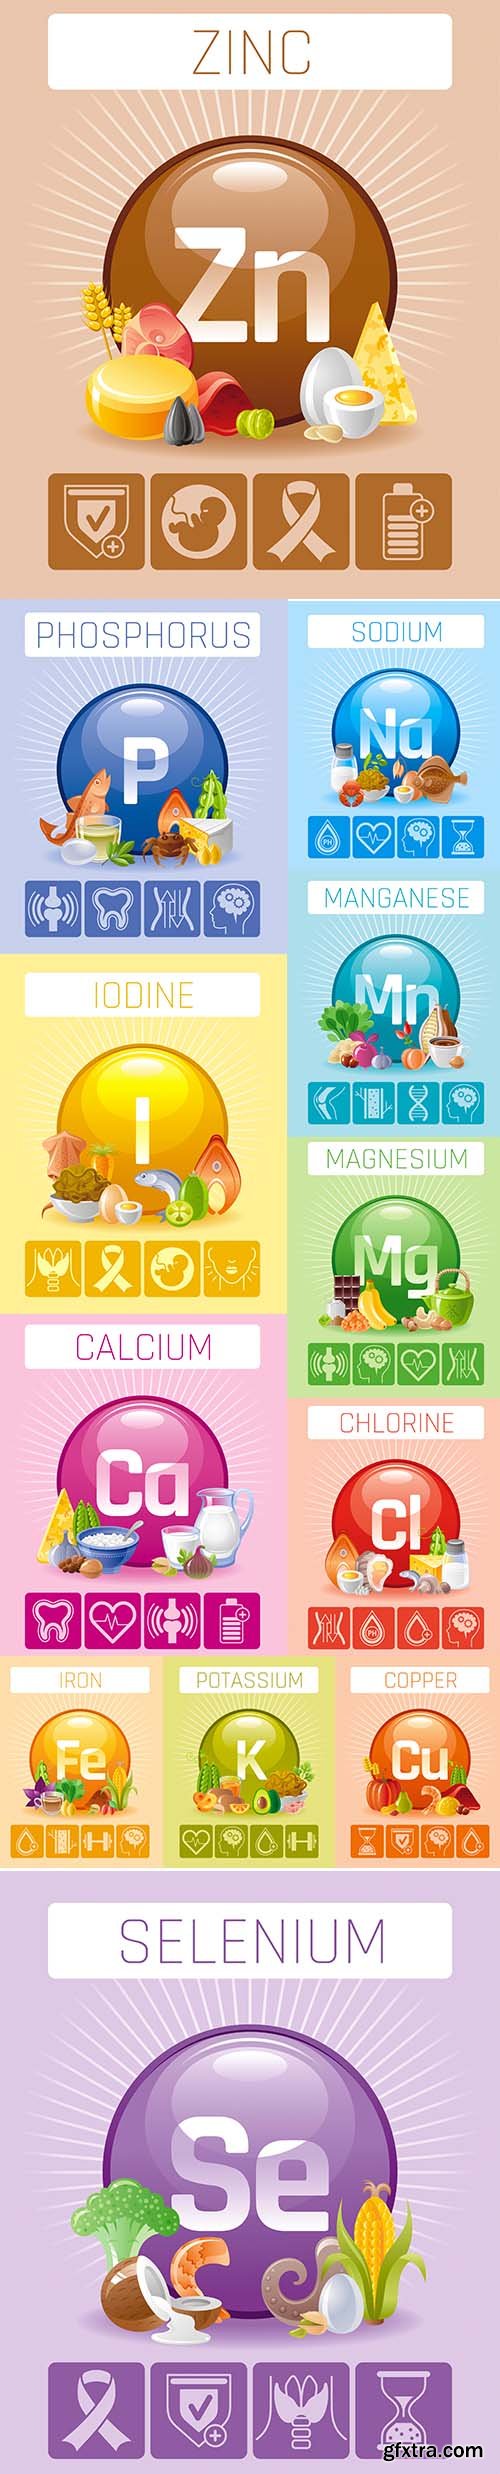 Mineral and Vitamin Supplement Illustrations